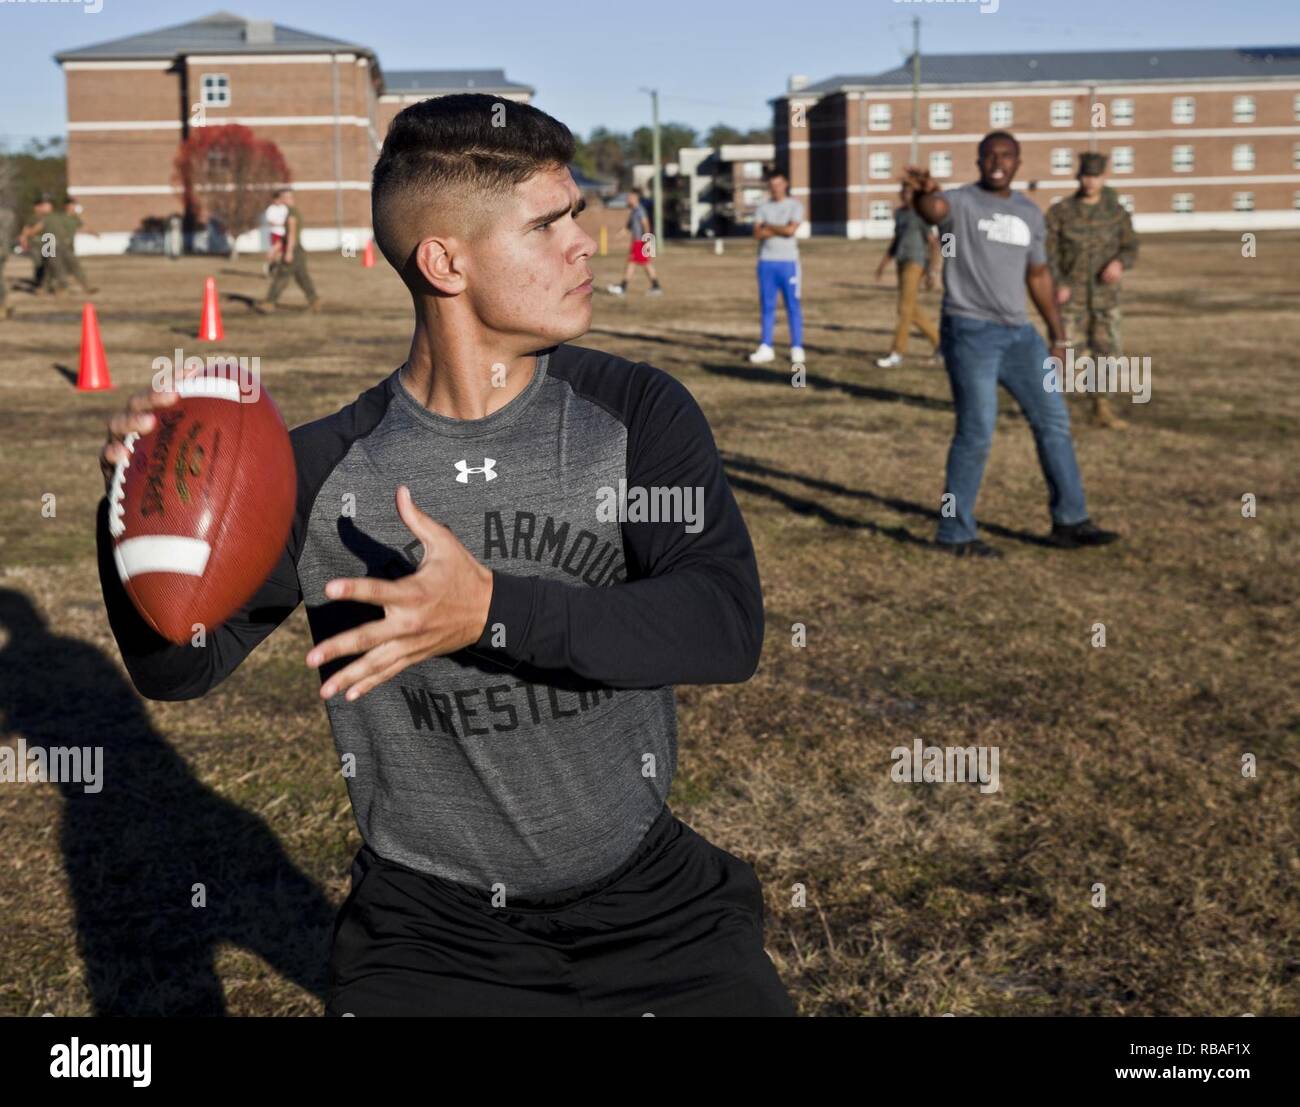 U.S. Marine Corps Pfc. Anthony Park, a student attending Personnel Administration School, Marine Corps Combat Service Support Schools, prepares to throw a football during the Holiday Bash at Camp Johnson N.C., Dec. 17, 2018. The Holiday Bash combined team-building exercises and holiday spirit activities to celebrate the past year, foster morale and esprit de corps, and to commemorate the holiday season for all Camp Johnson personnel. Stock Photo